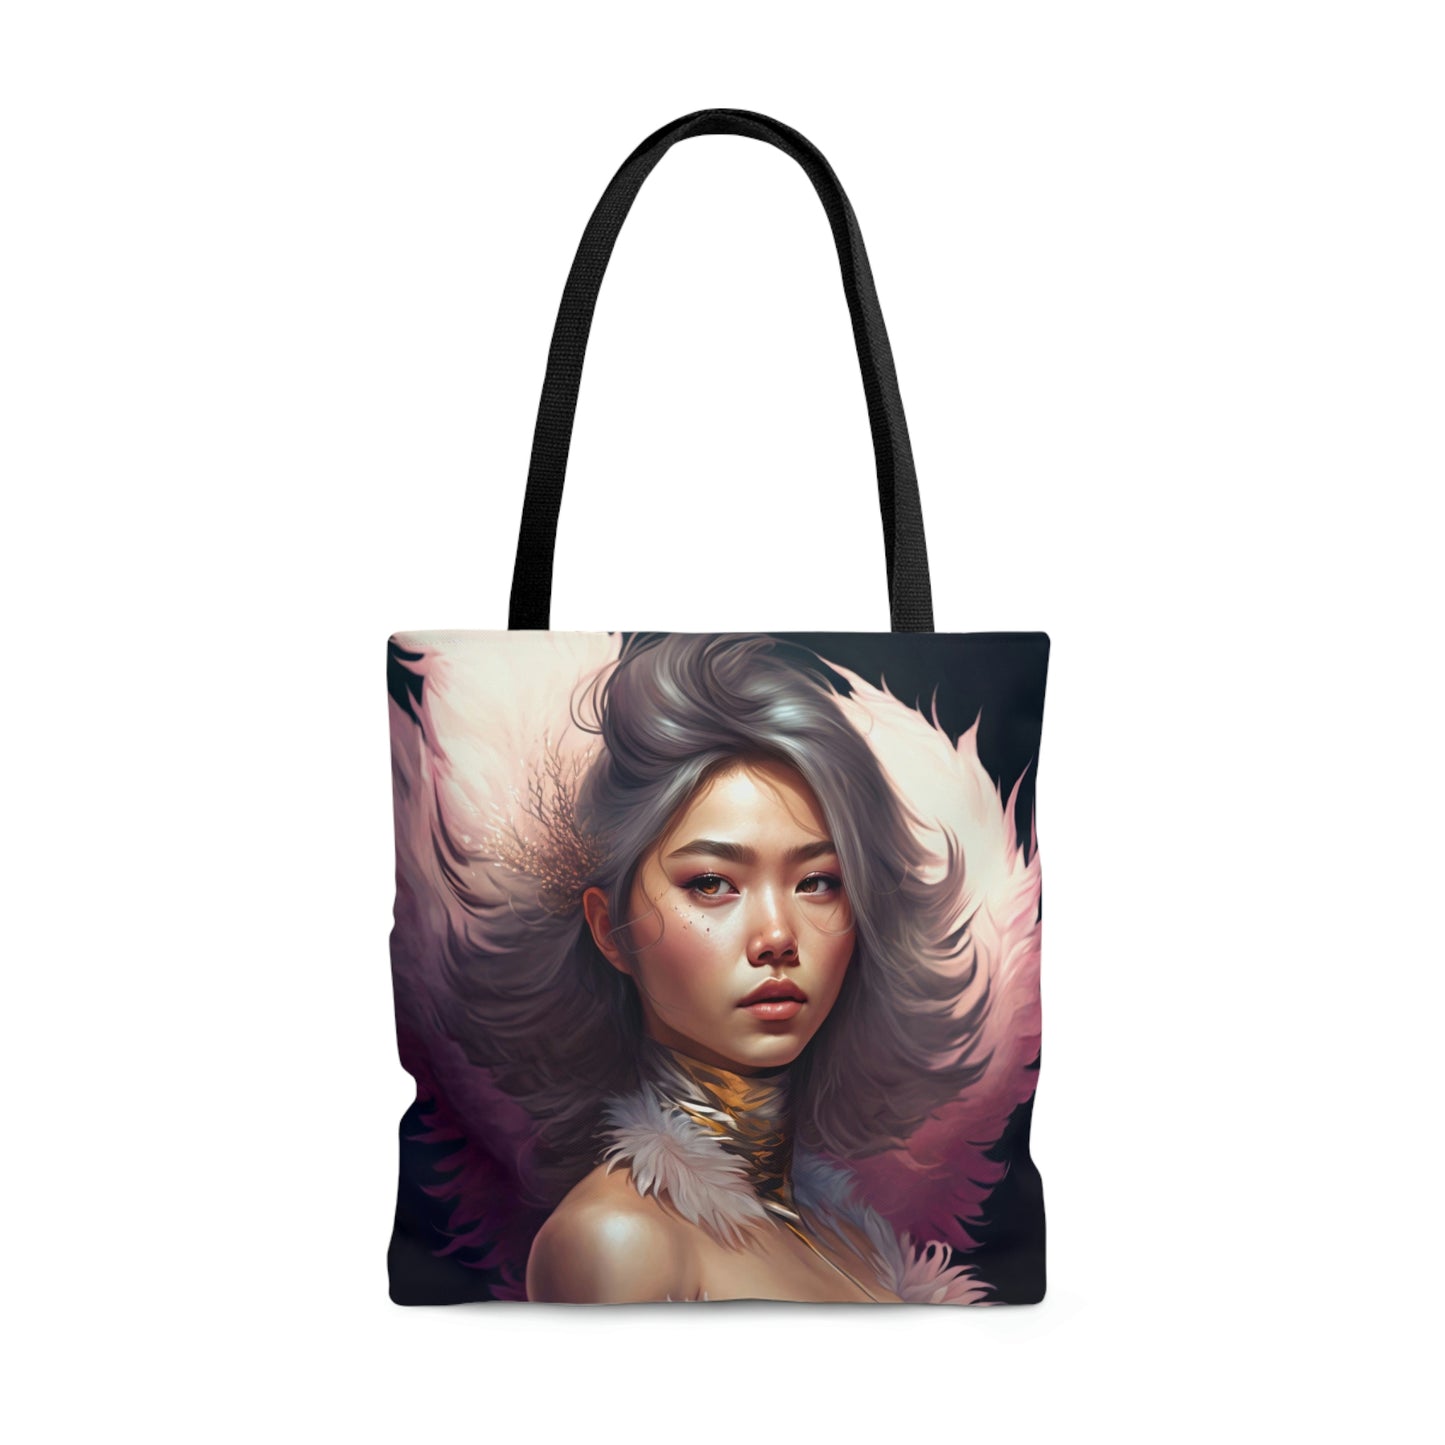 Feathered Tote Bag